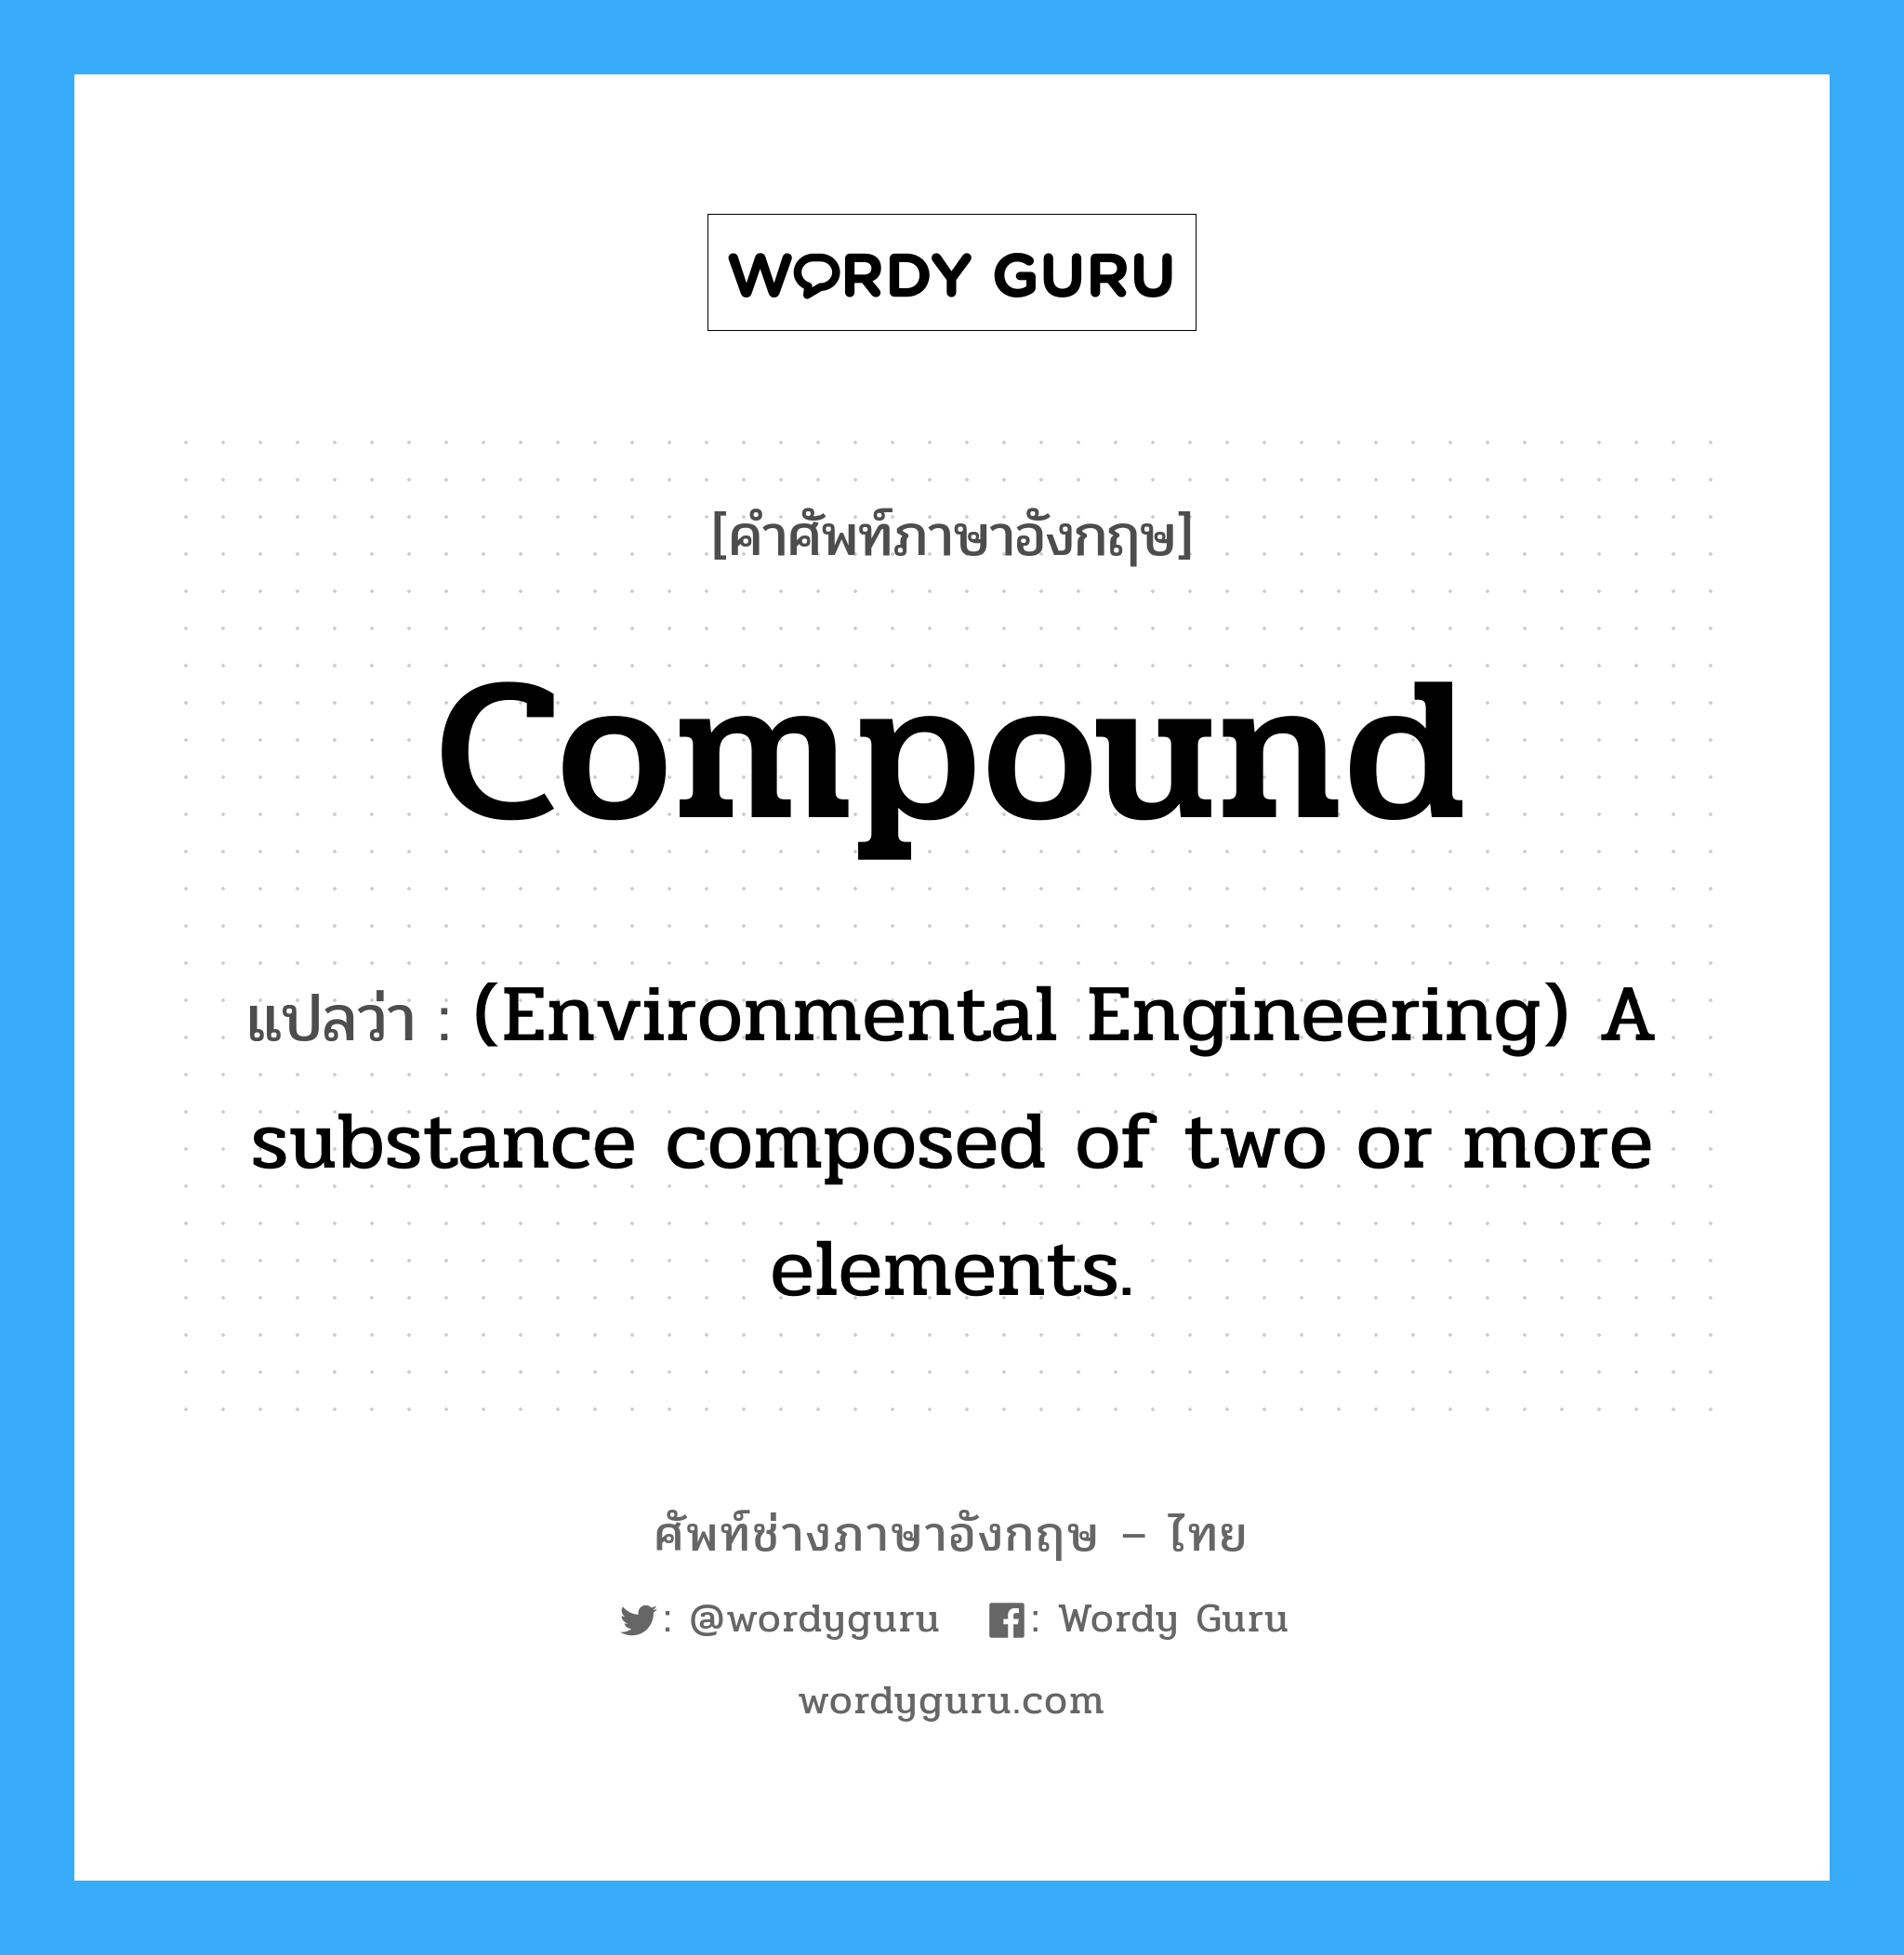 Compound แปลว่า?, คำศัพท์ช่างภาษาอังกฤษ - ไทย Compound คำศัพท์ภาษาอังกฤษ Compound แปลว่า (Environmental Engineering) A substance composed of two or more elements.